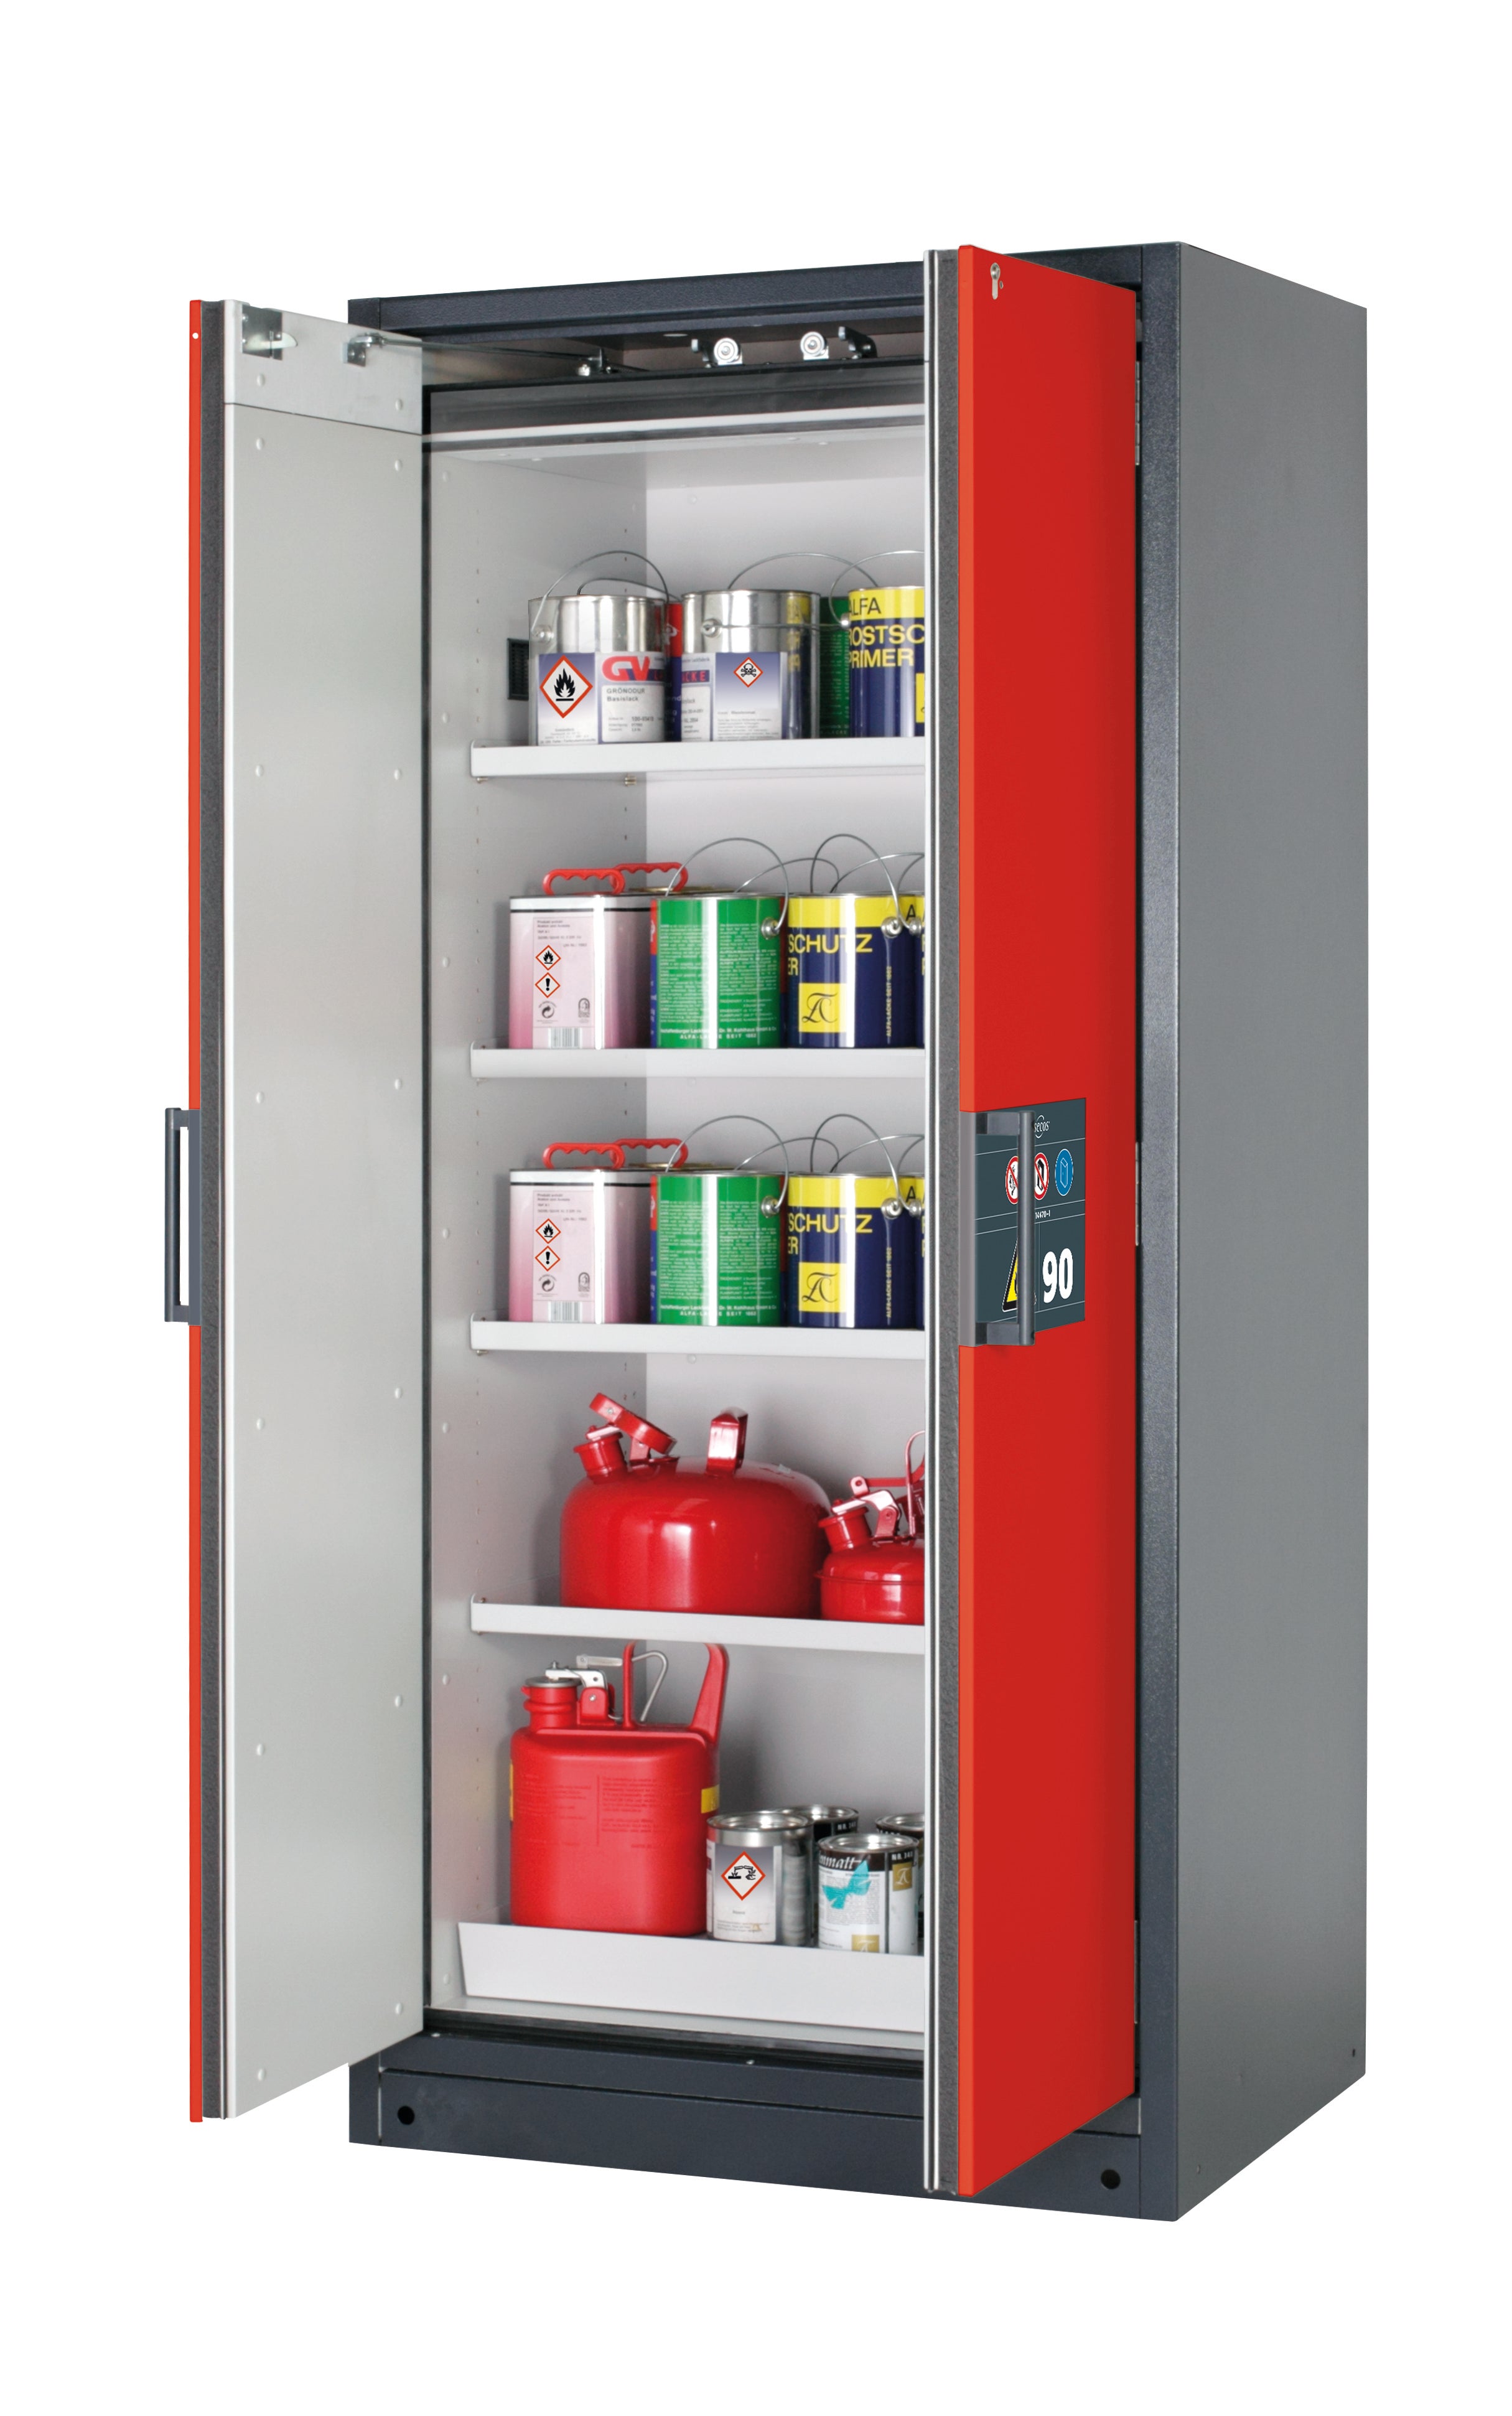 Type 90 safety storage cabinet Q-CLASSIC-90 model Q90.195.090 in traffic red RAL 3020 with 4x shelf standard (sheet steel),